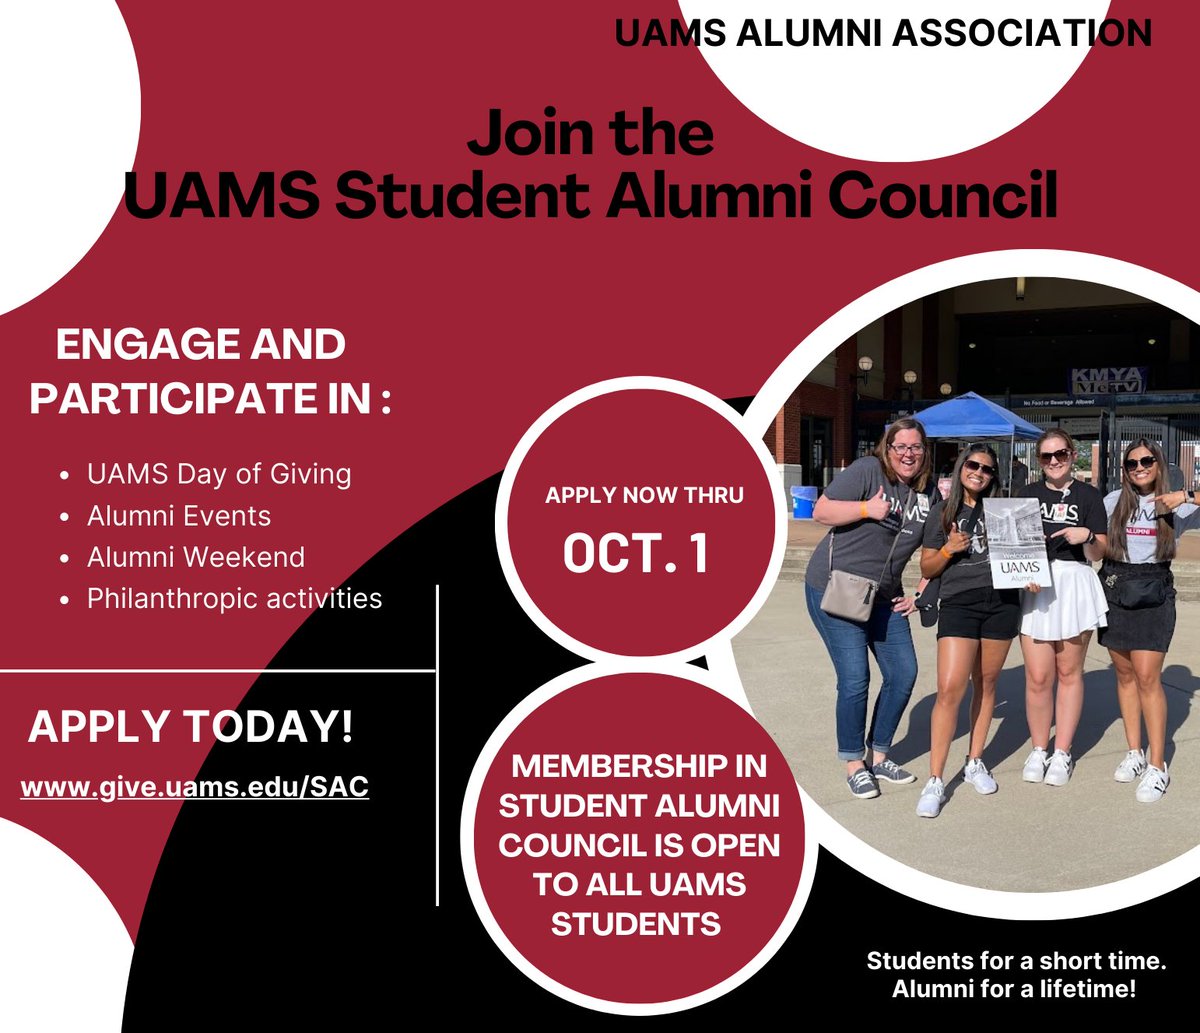 Applications are now being accepted for the Student Alumni Council (SAC), a leadership organization sponsored by the UAMS Alumni Association. The SAC is open to students in all UAMS colleges and the graduate school. Applications will be accepted through October 1.